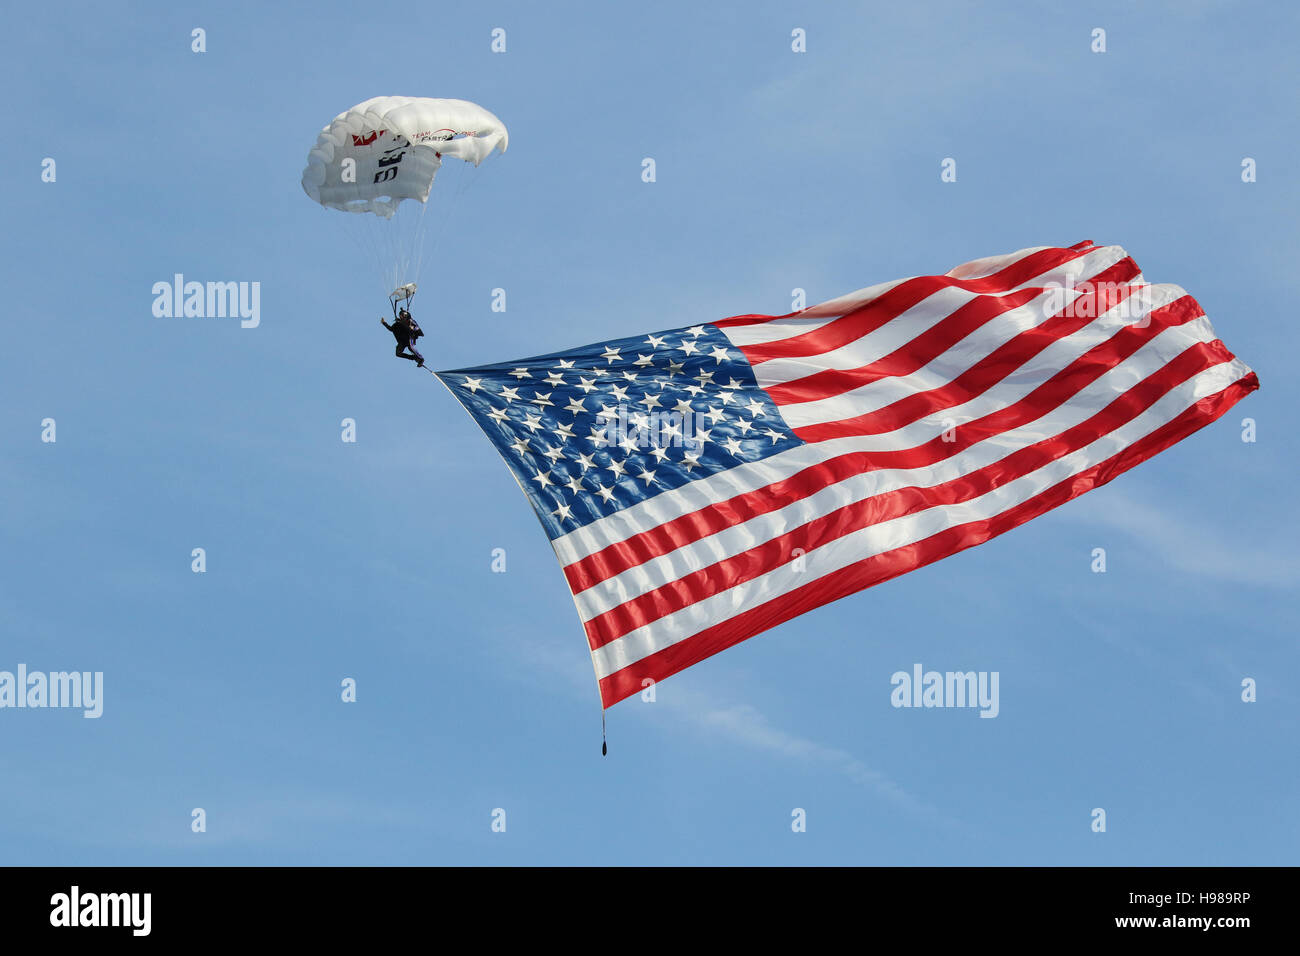 Skydiver from FastTrax.com flies in the American Flag. Dayton Dragons, Fifth Third Field, Dayton, Ohio, USA. Stock Photo